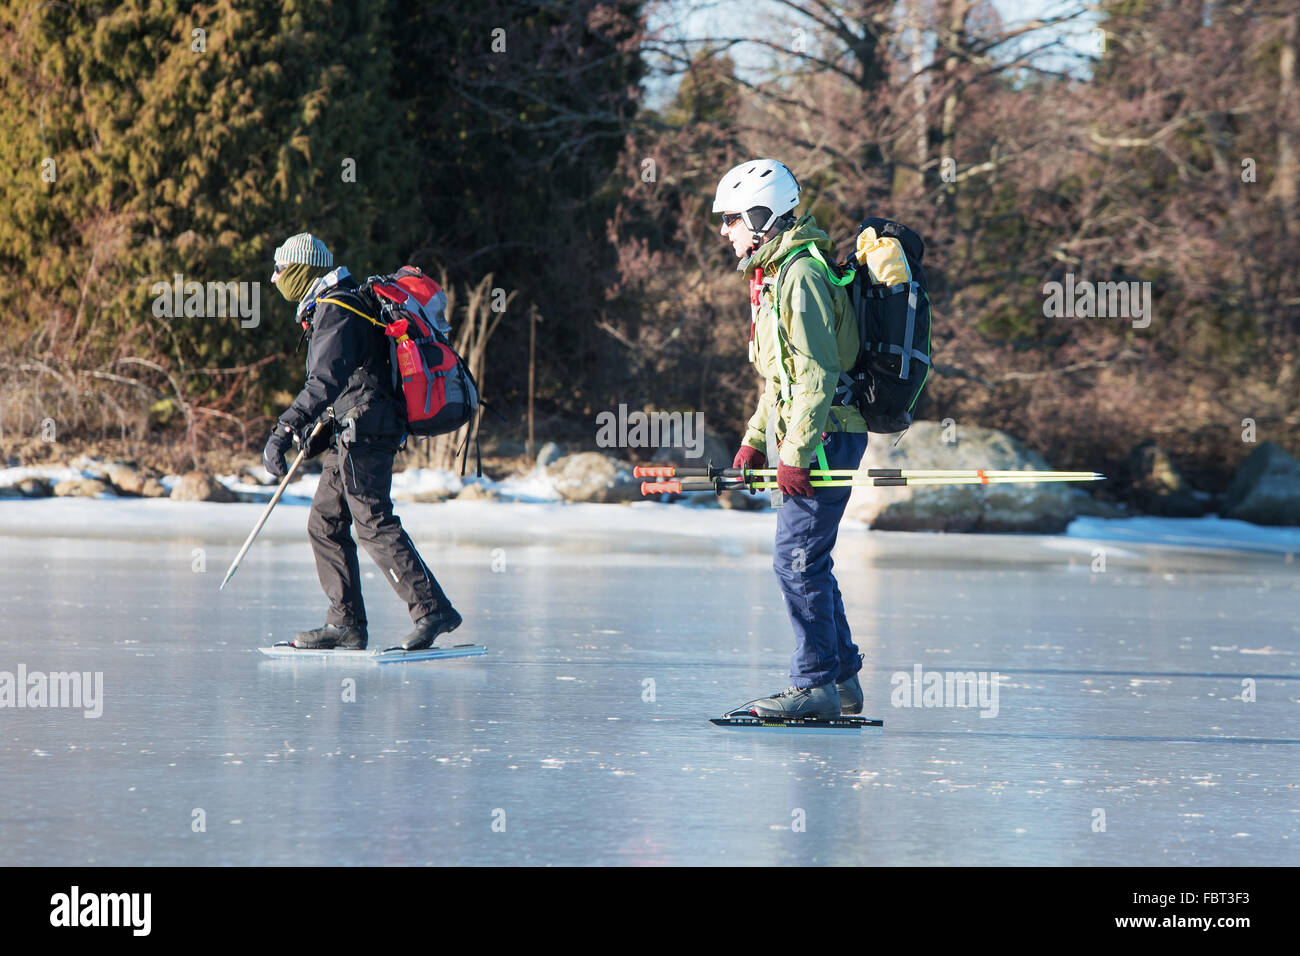 Listerby, Sweden - January 17, 2016: Two unknown persons out on a long distance tour skating trip in the archipelago. They have Stock Photo